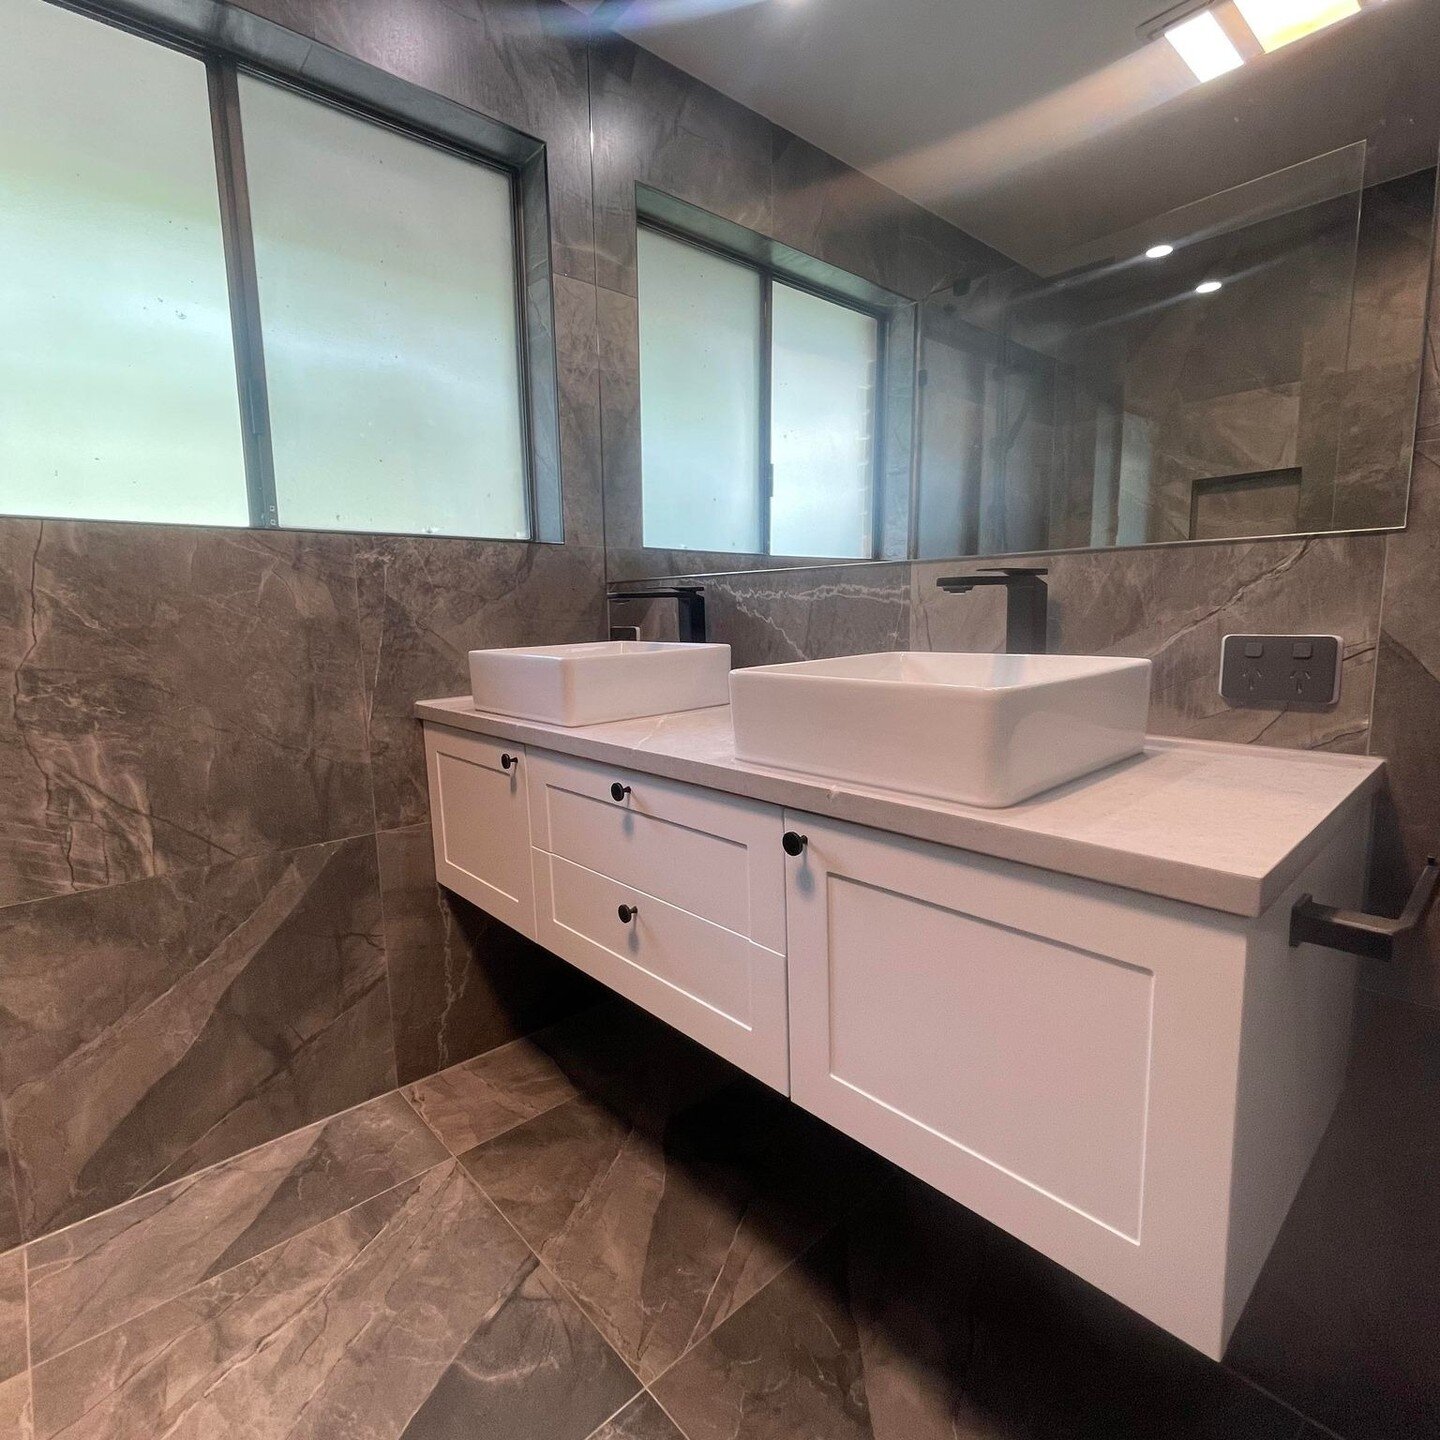 Experience the ultimate in modern luxury with our latest bathroom renovation featuring a sleek wall hung vanity and stunning walk-in shower. This stunning transformation is the perfect example of how Gold Star Bathrooms can help you turn your dream b